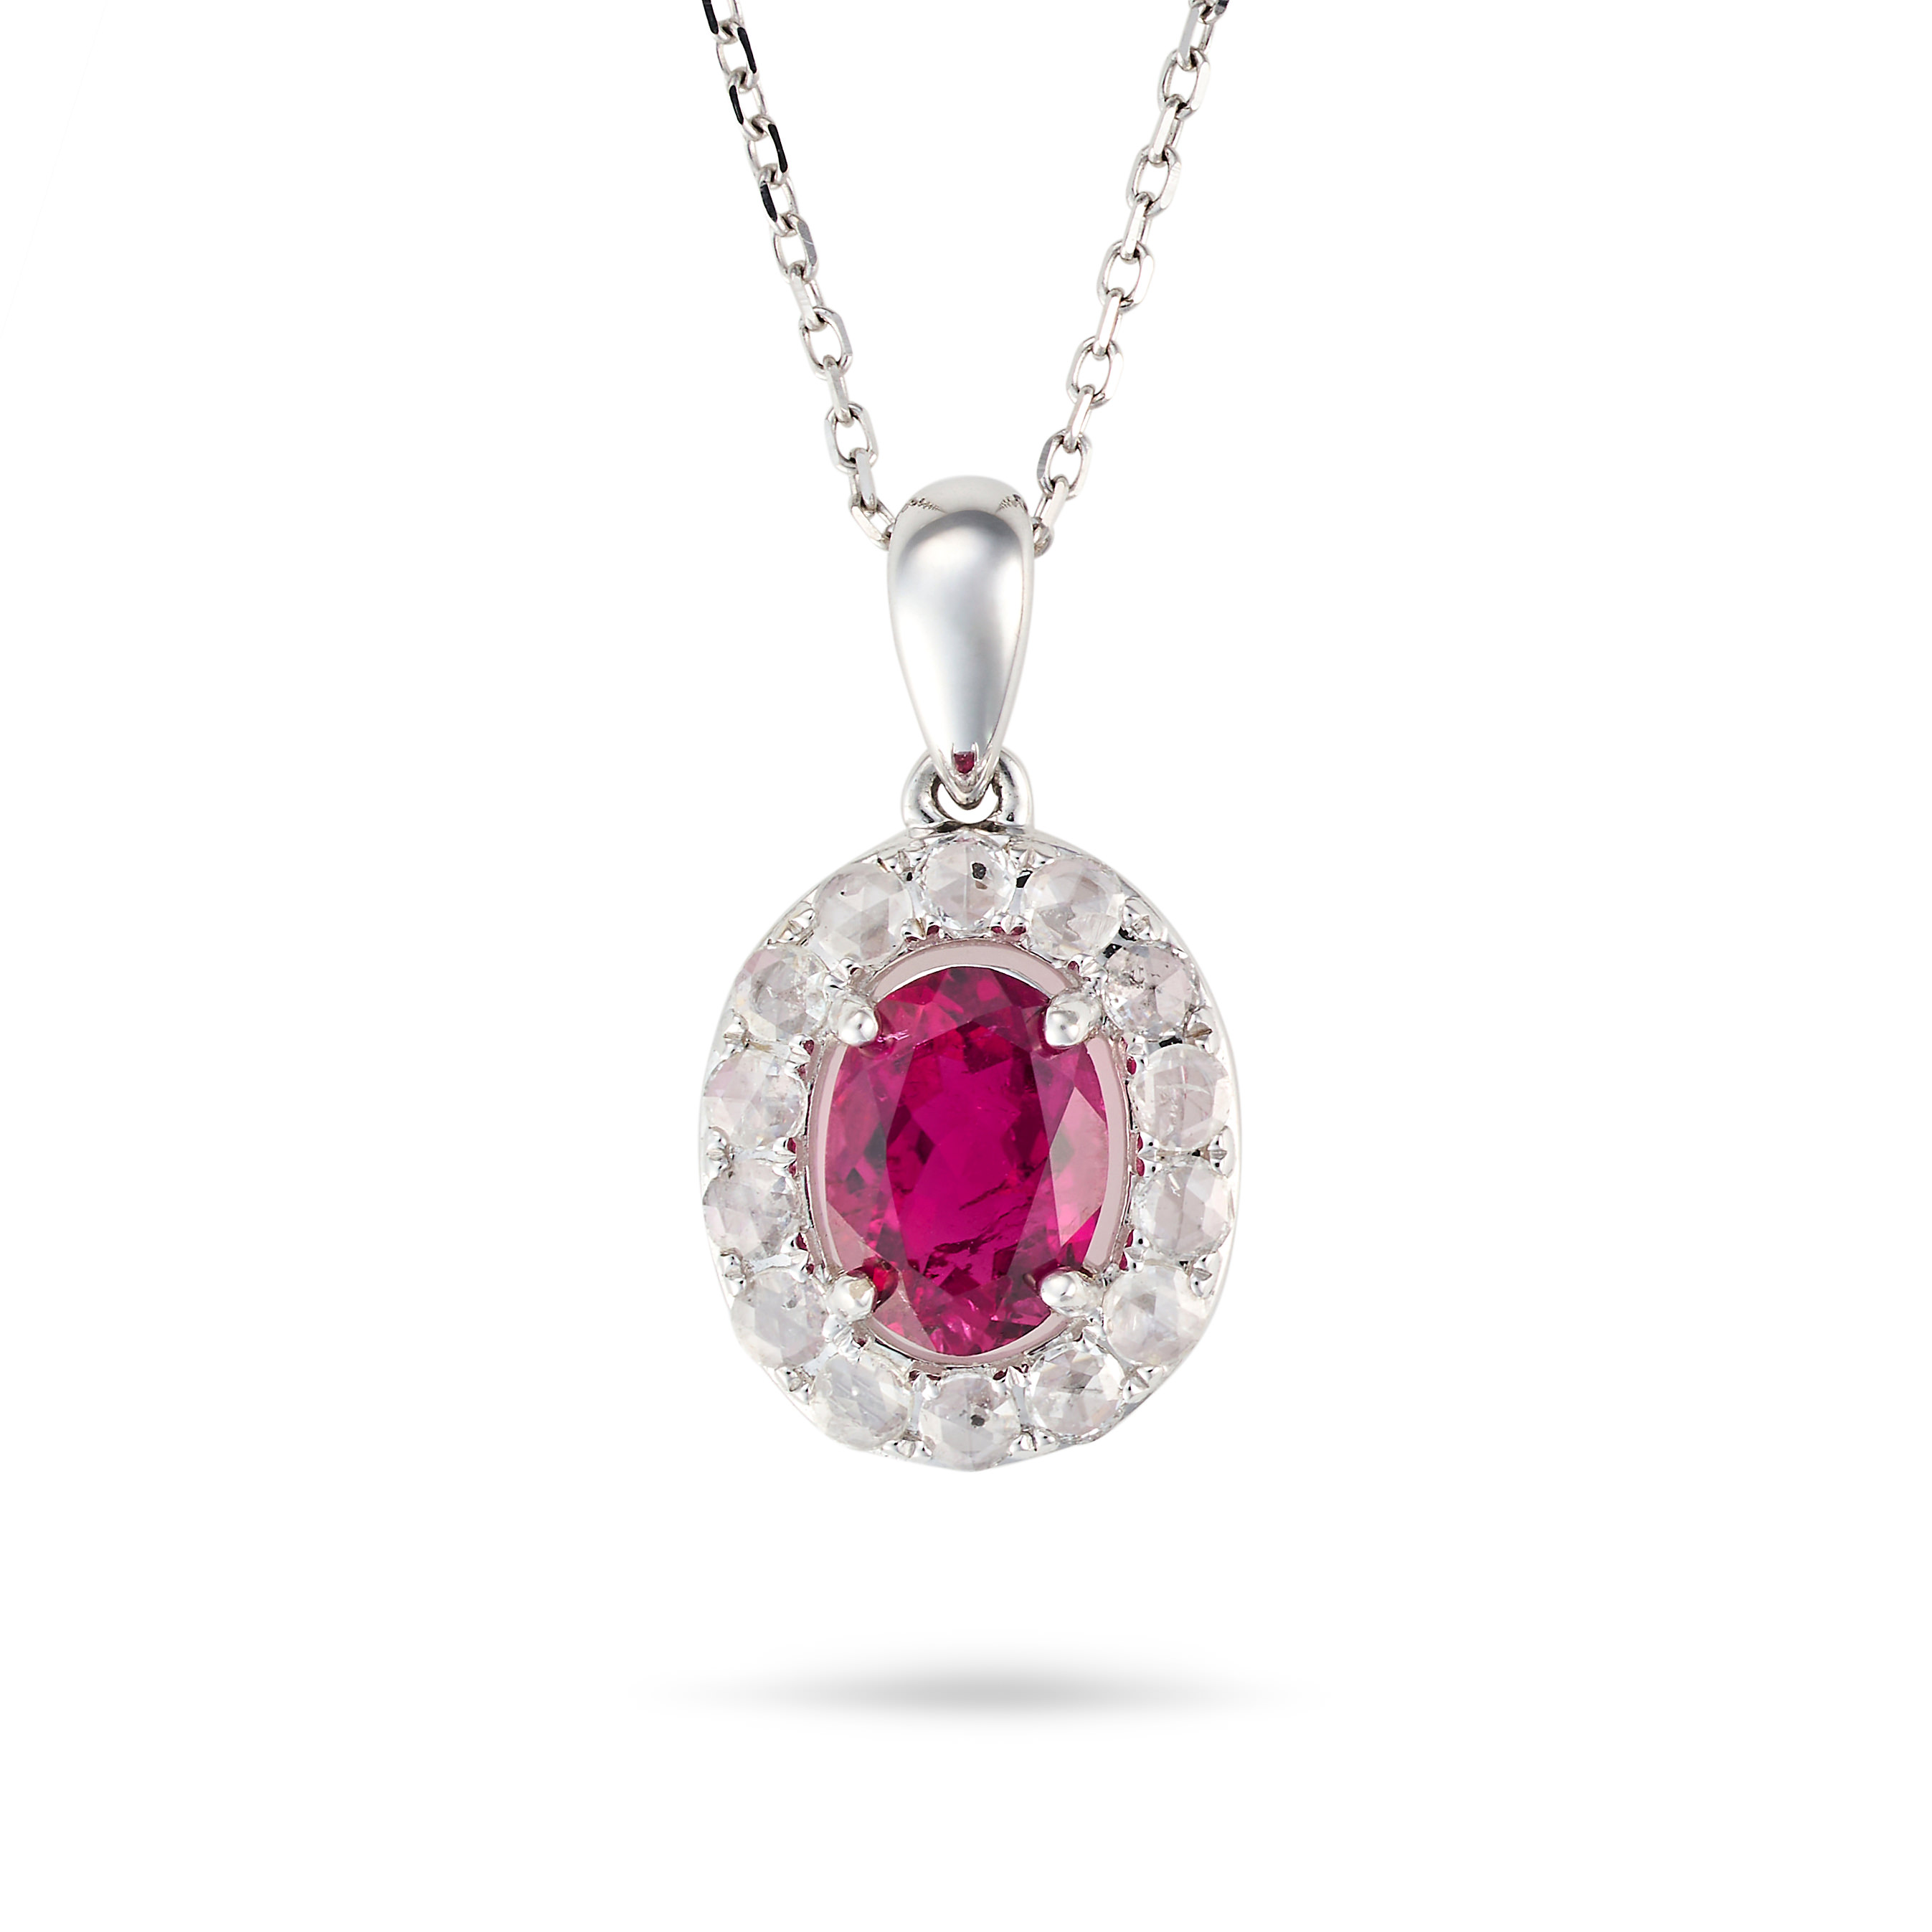 A RUBELLITE TOURMALINE AND DIAMOND PENDANT NECKLACE the pendant set with an oval cut rubellite to...